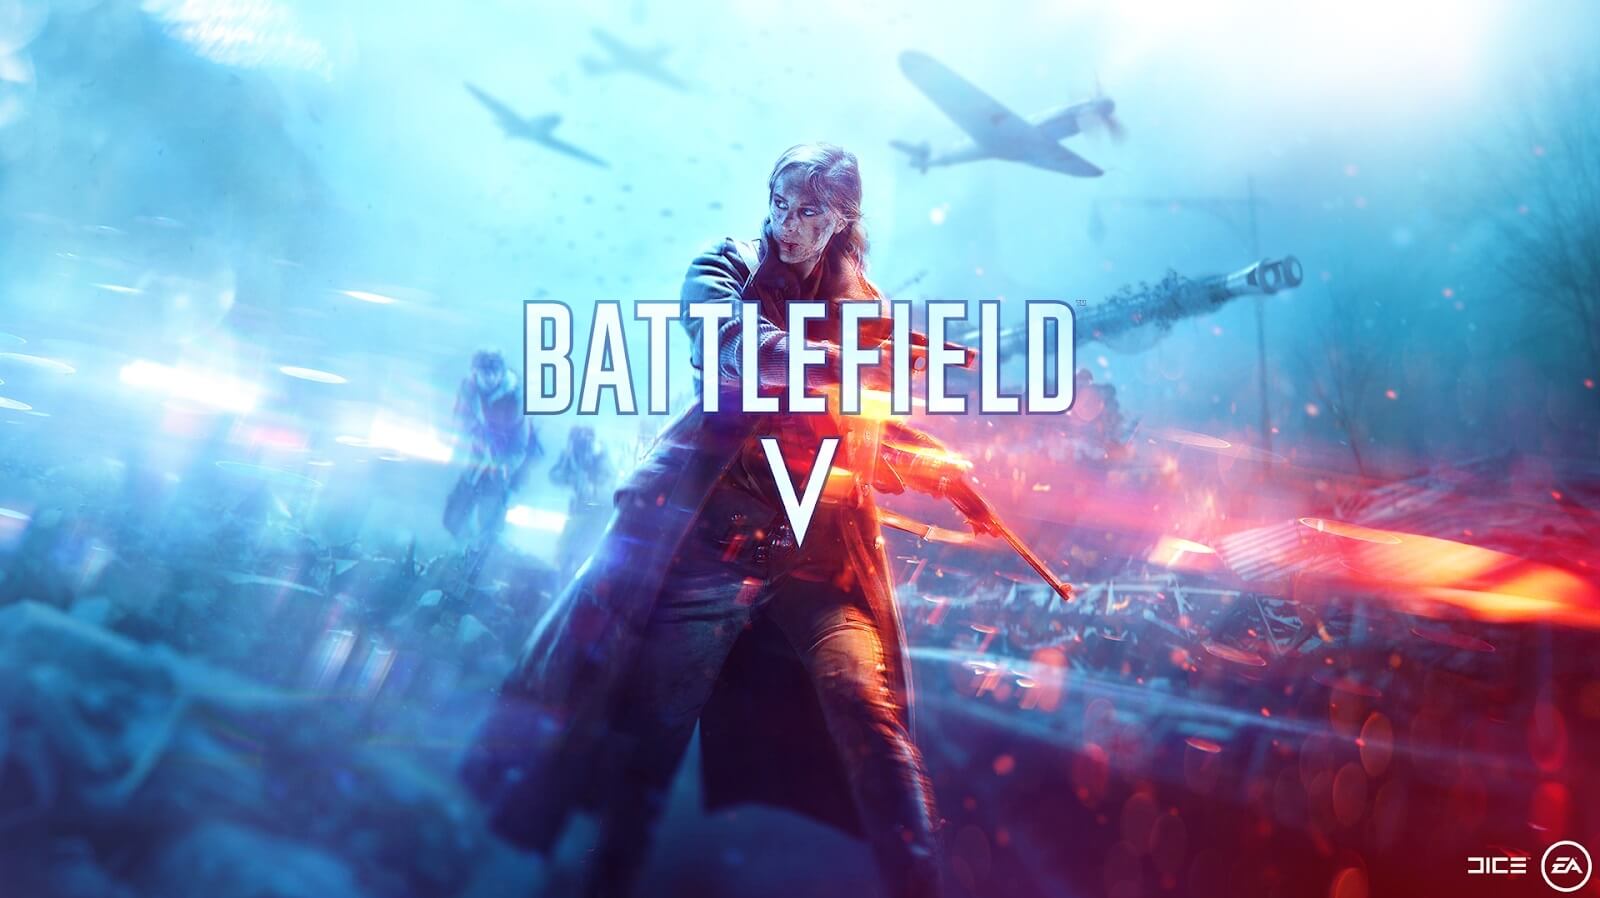 Battlefield V will have women in the war and that angered some players